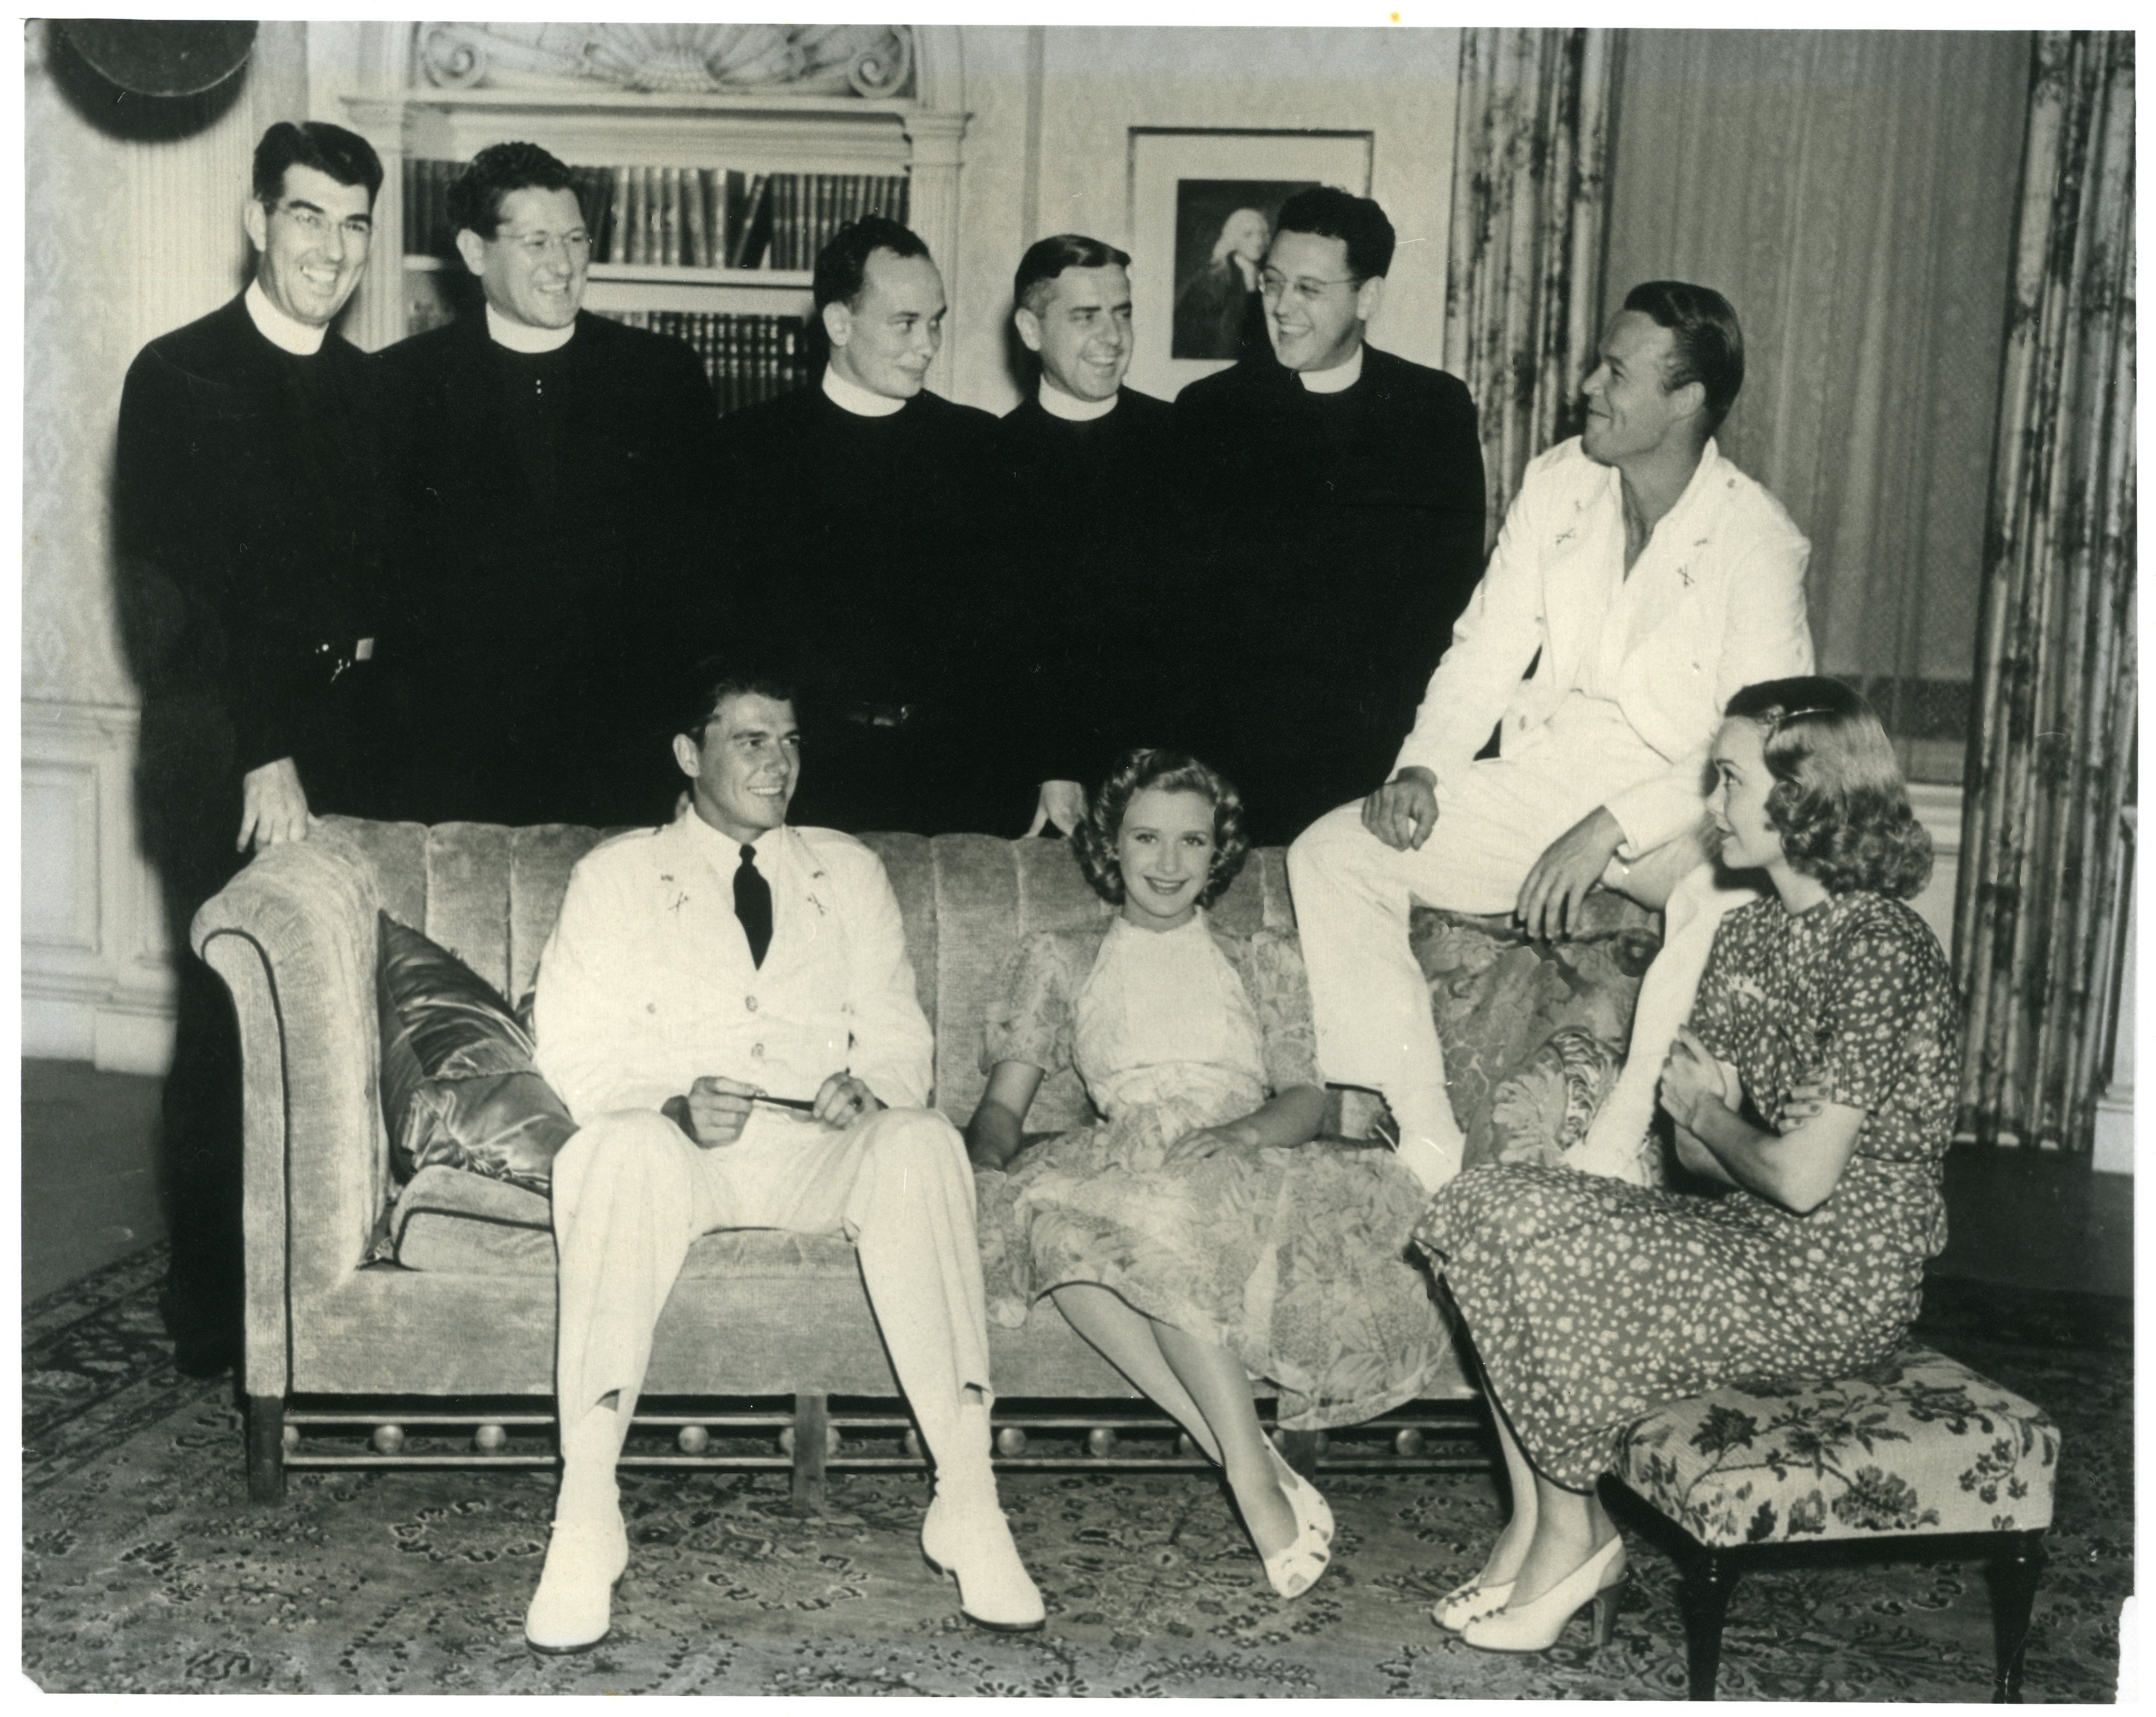 Ronald Reagan, Jane Wyman, Alfie Lambe and other unidentified priests at unknown location